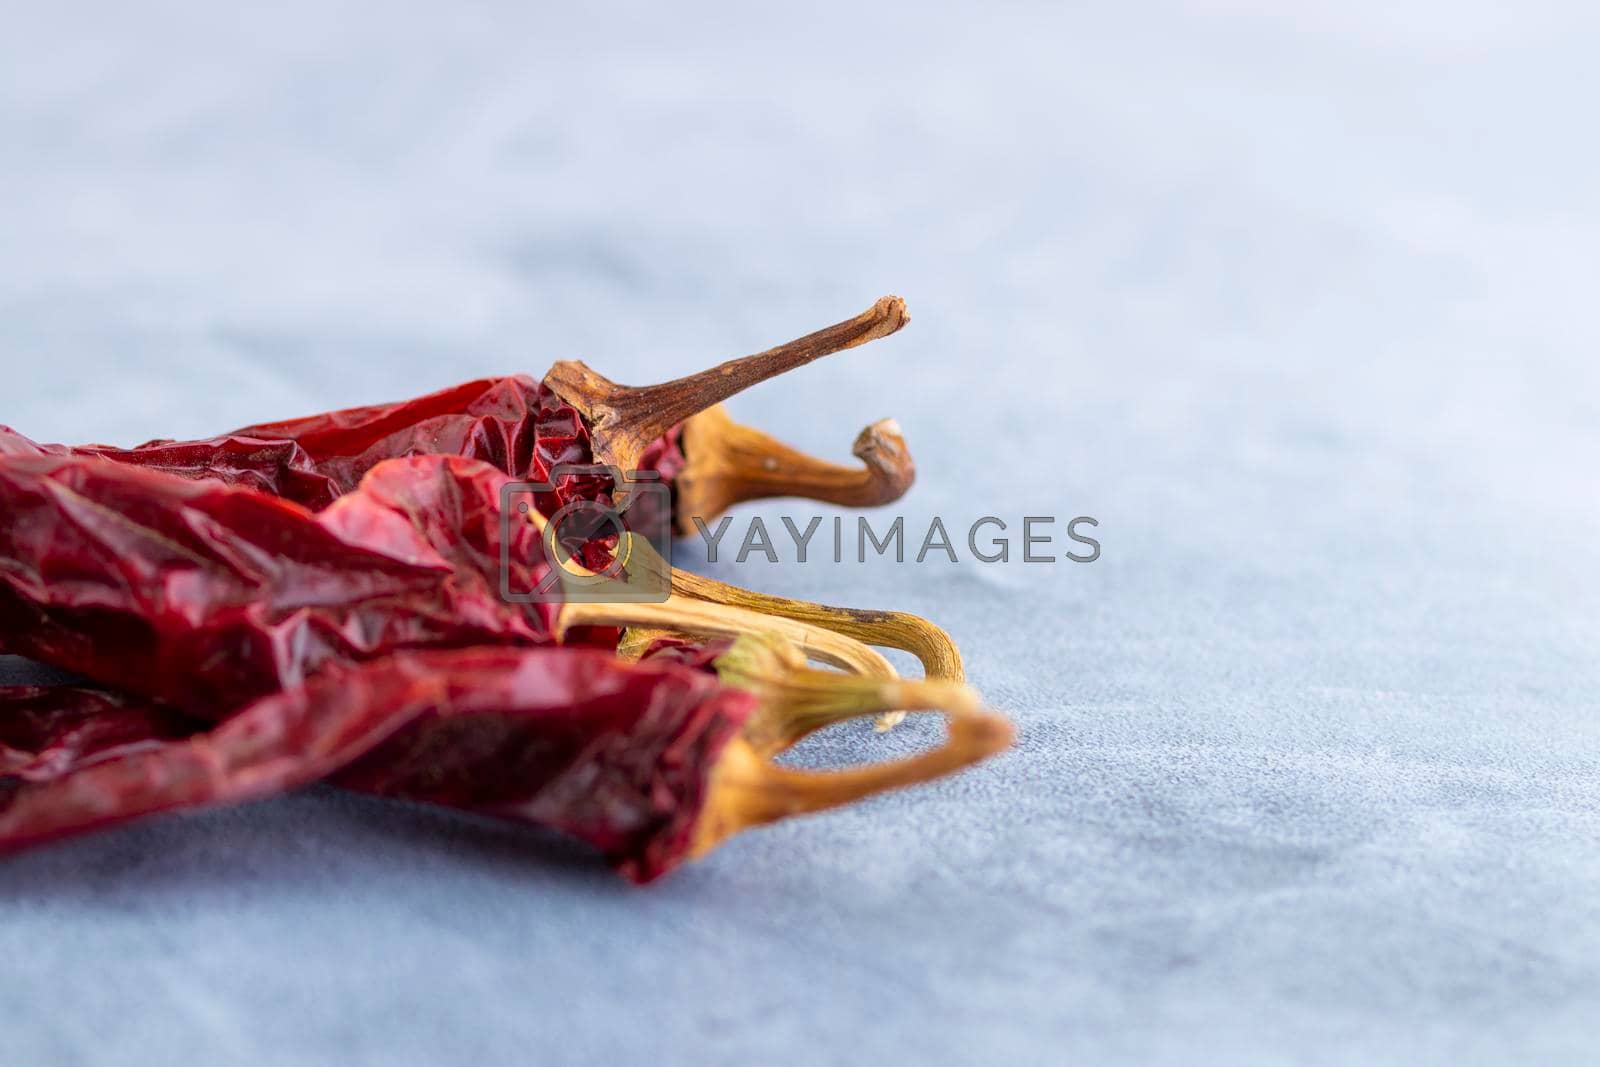 Royalty free image of View of dehydrated bell pepper, used as an ingredient in cooking by eagg13